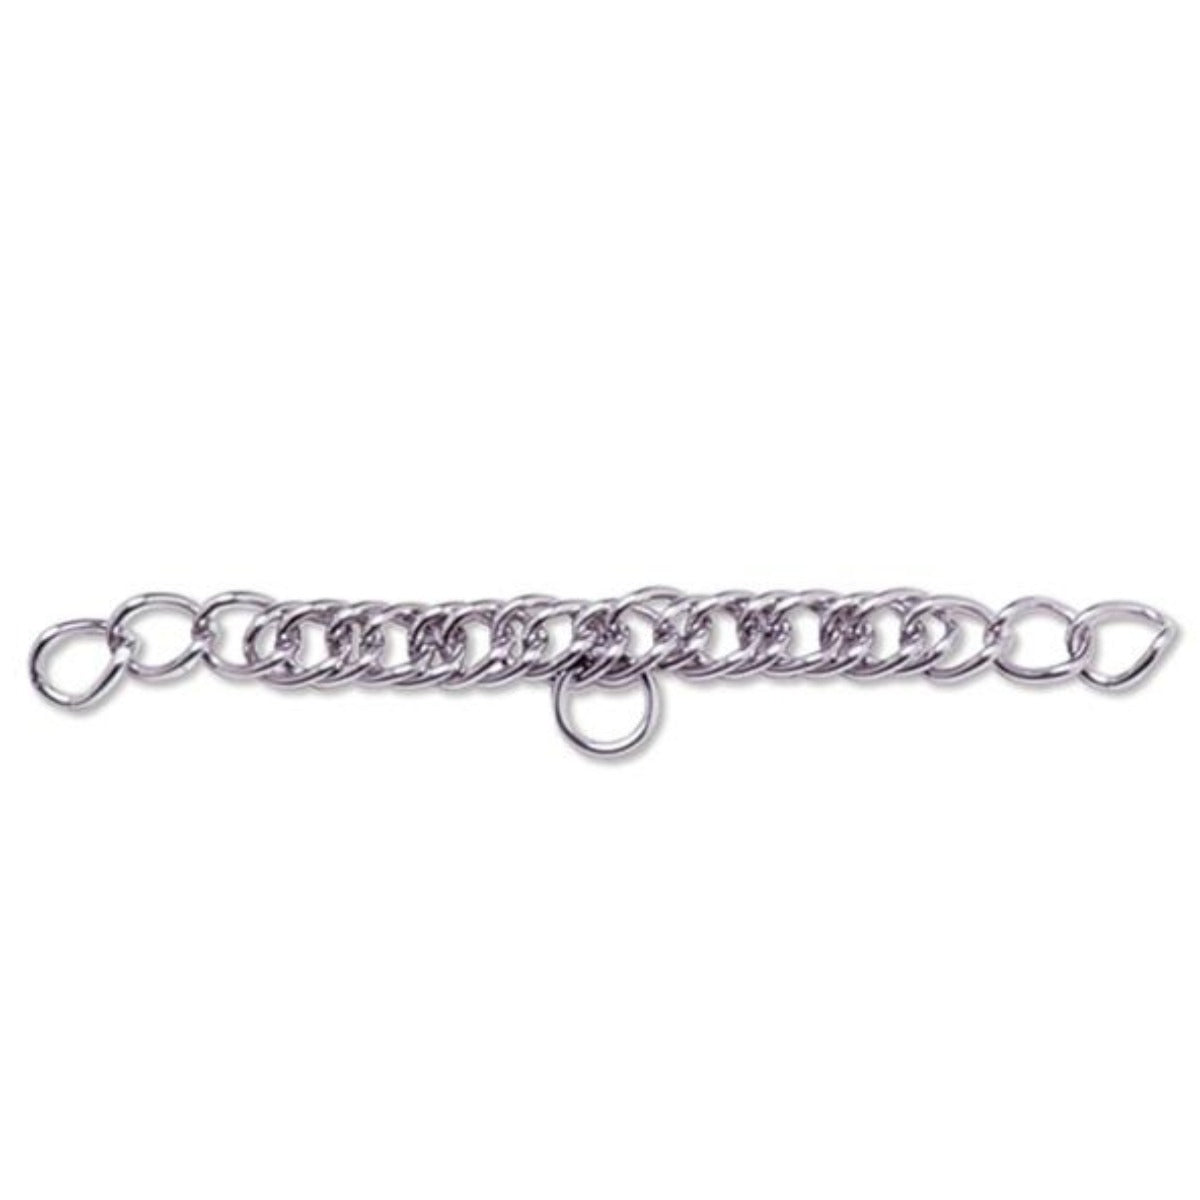 Curb Chain with 24 Links